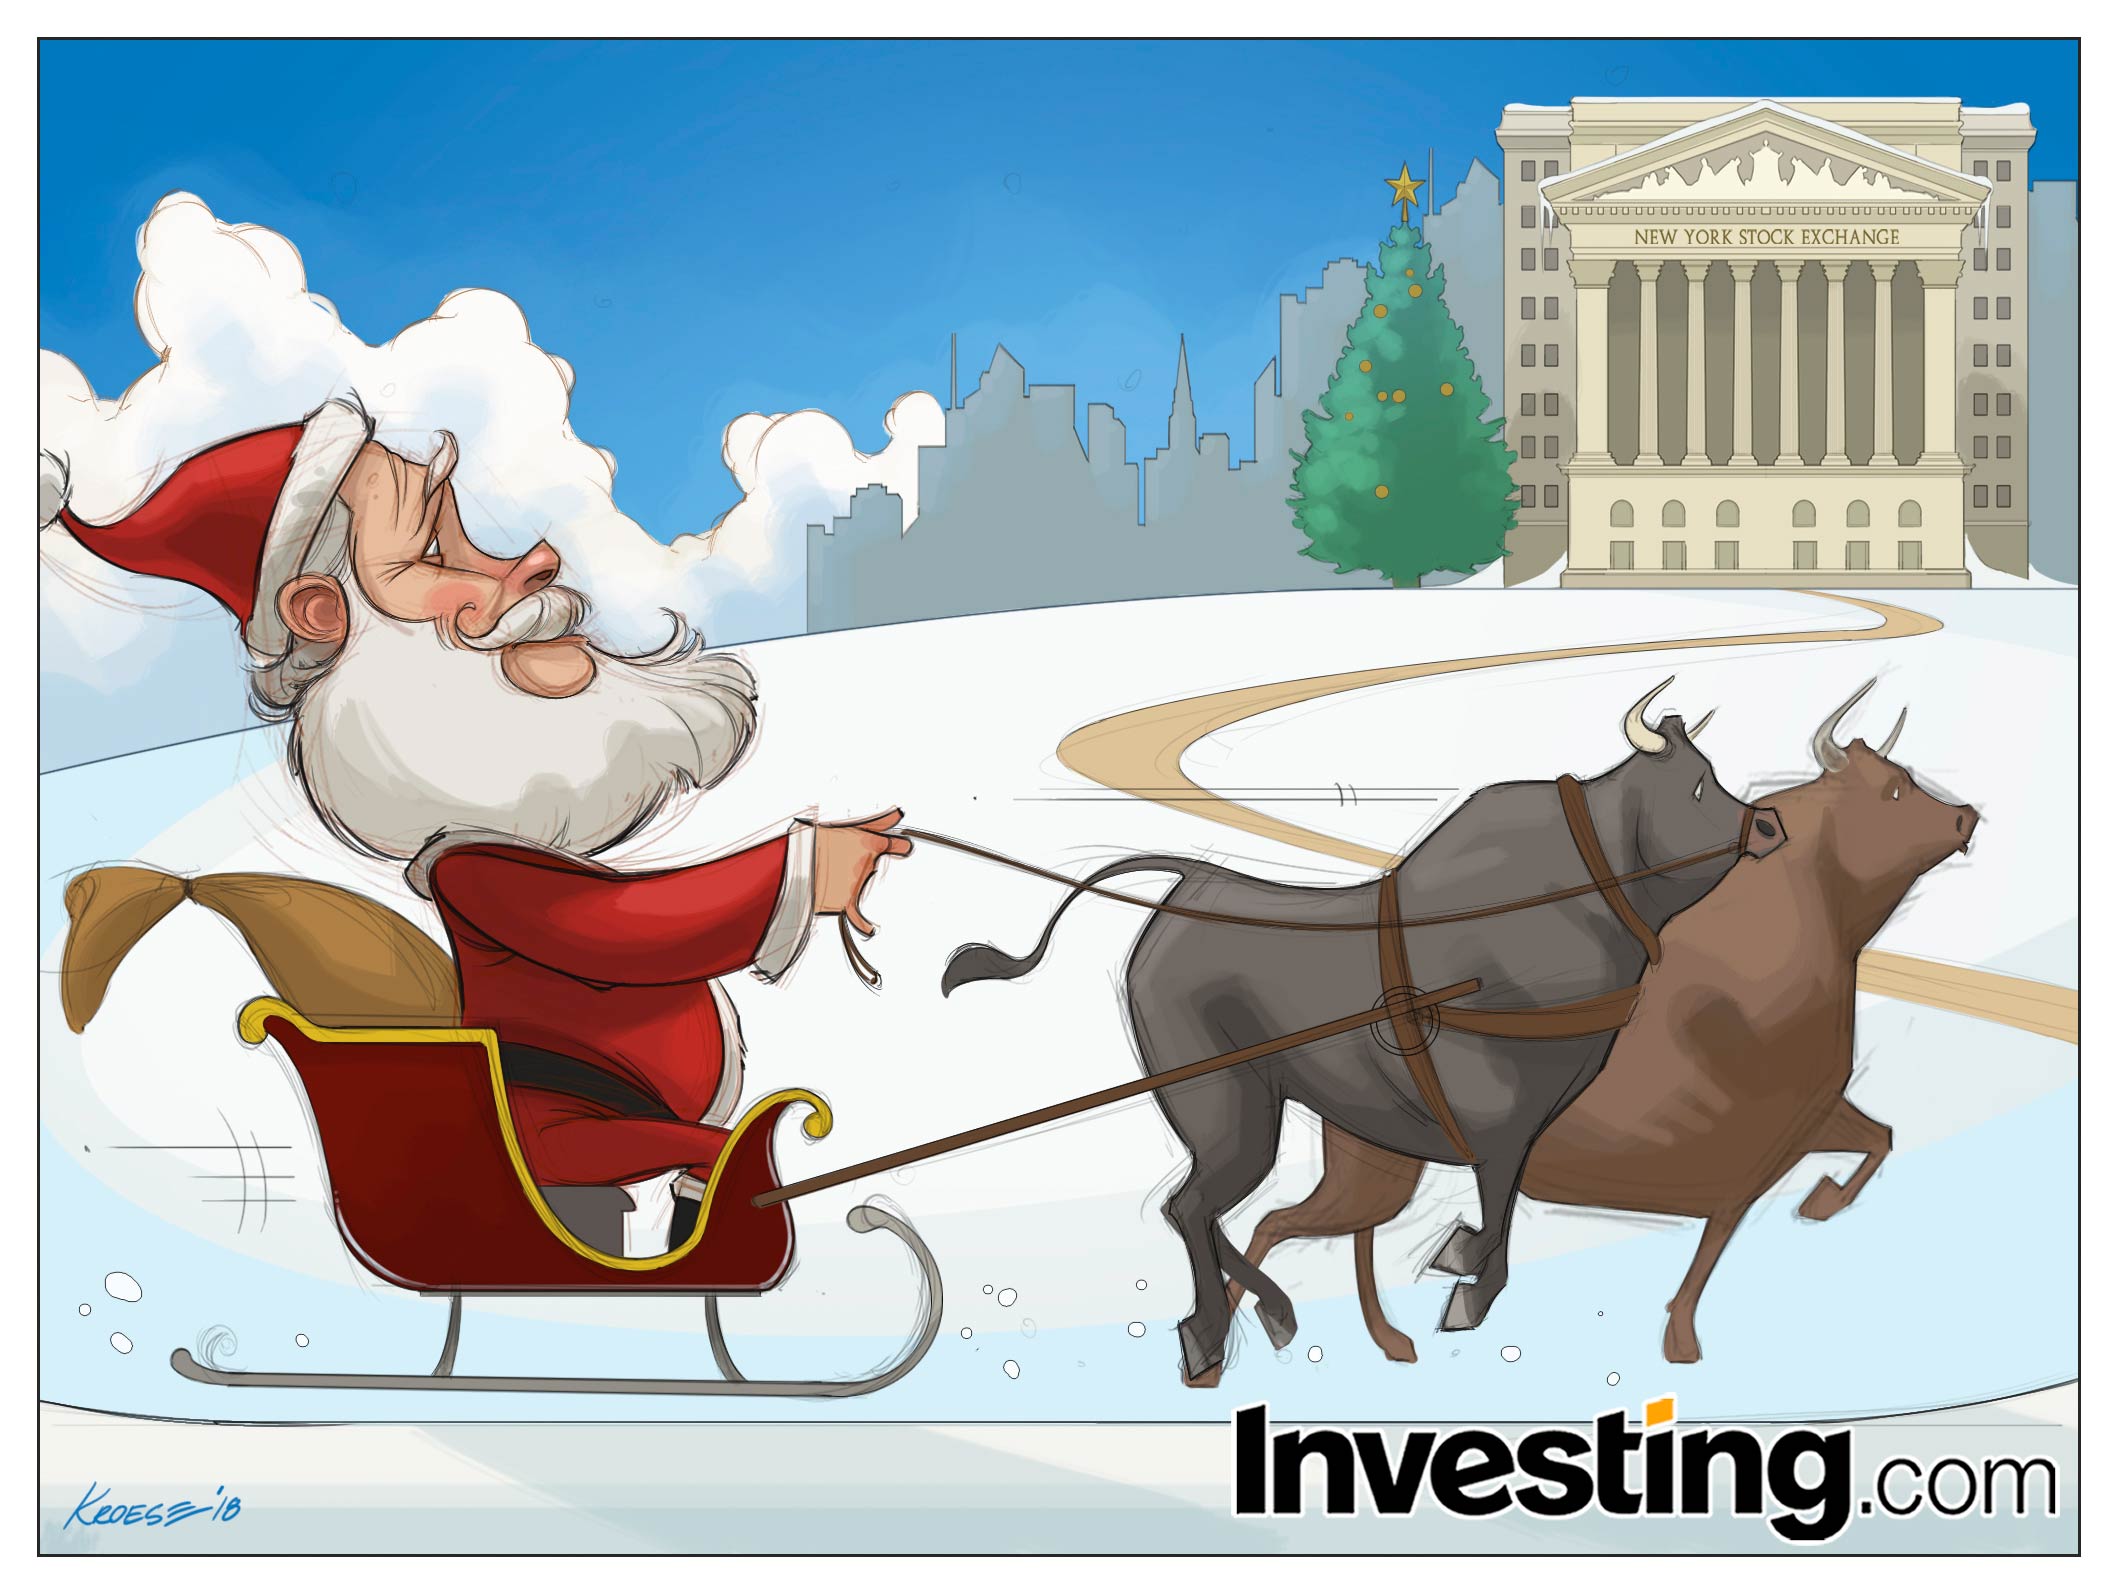 Will a ‘Santa Rally’ come to Wall St. this year, or will Trump’s trade wars send markets lower?